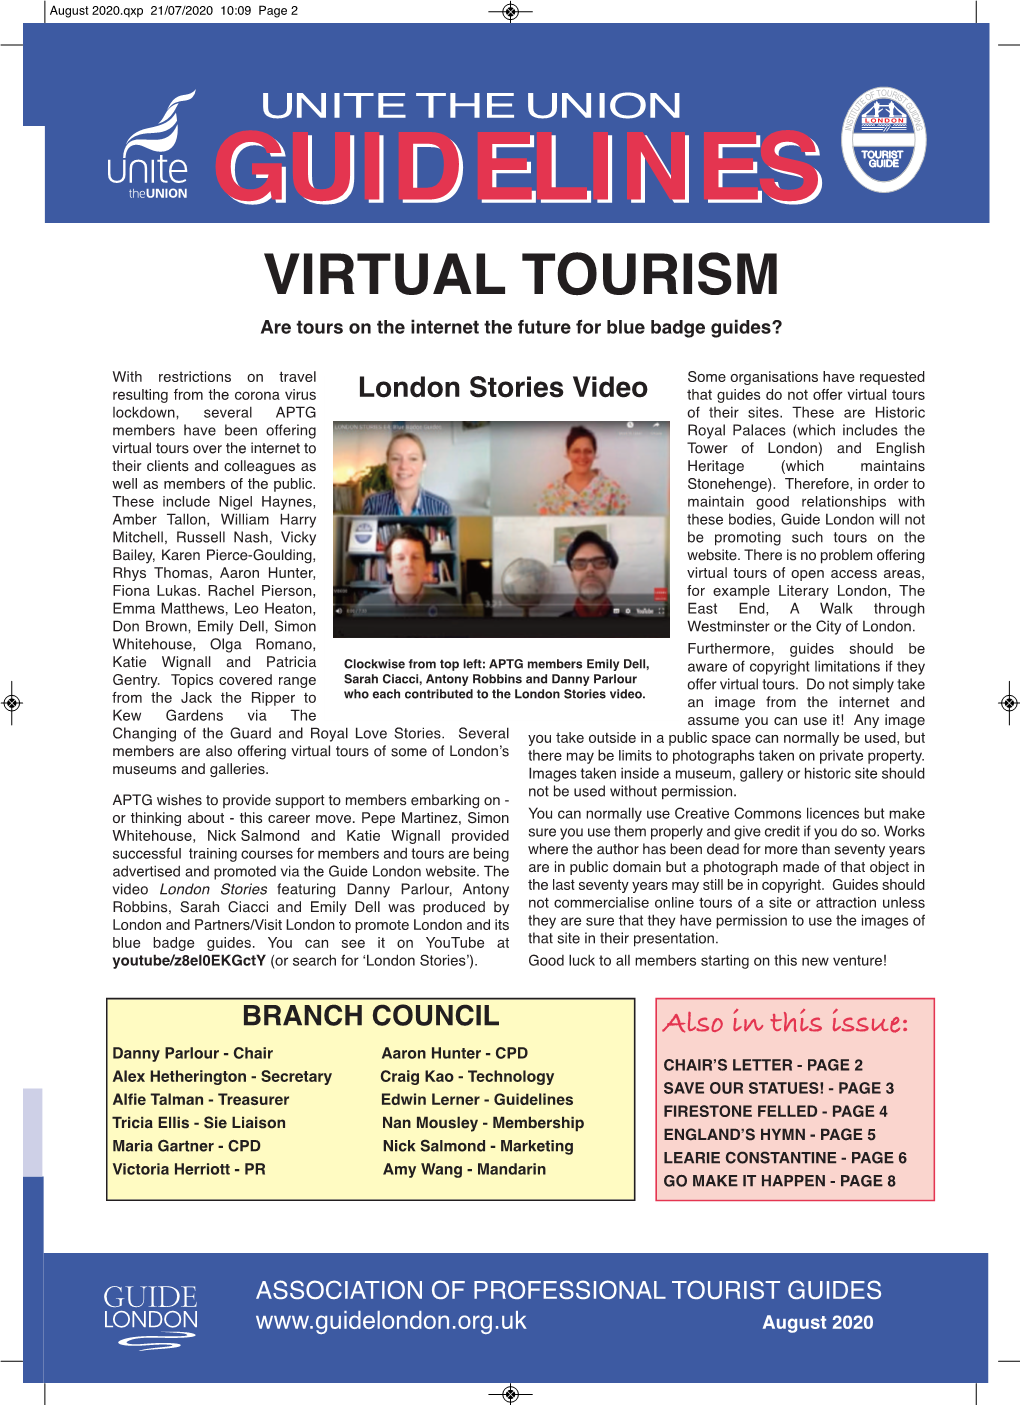 VIRTUAL TOURISM Are Tours on the Internet the Future for Blue Badge Guides?